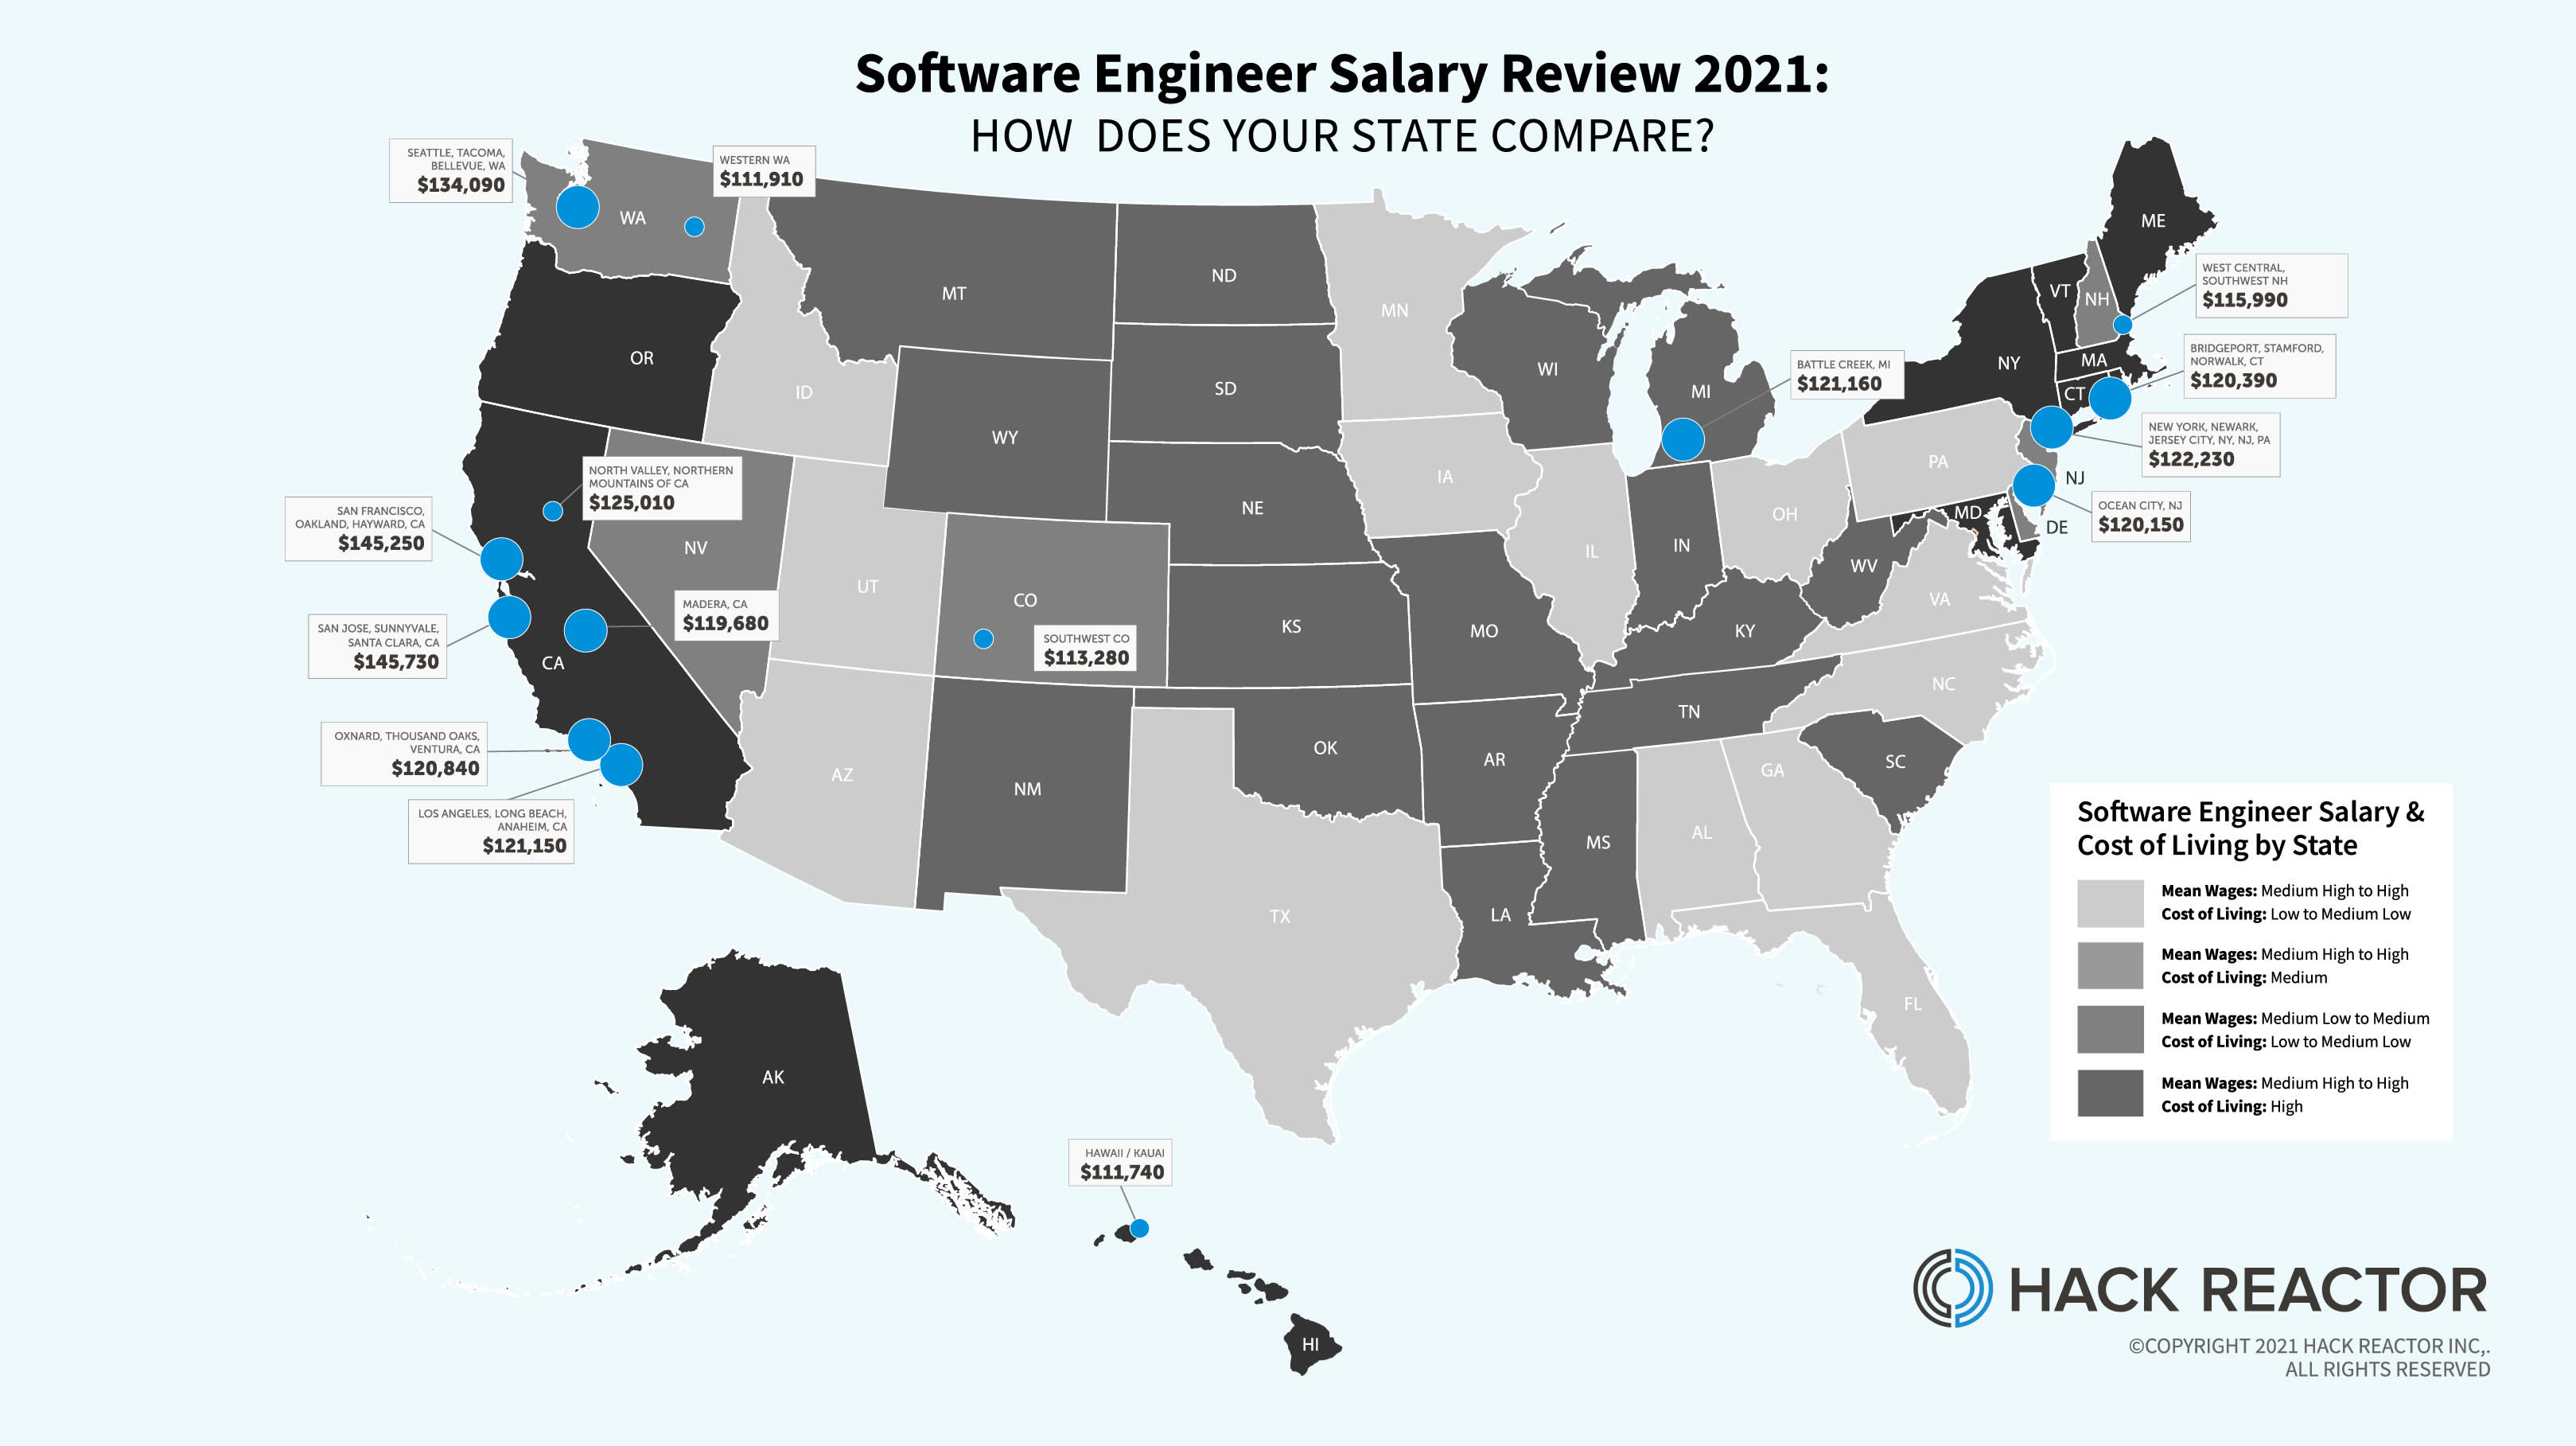 Software engineer salary review 2021: How does your state compare?